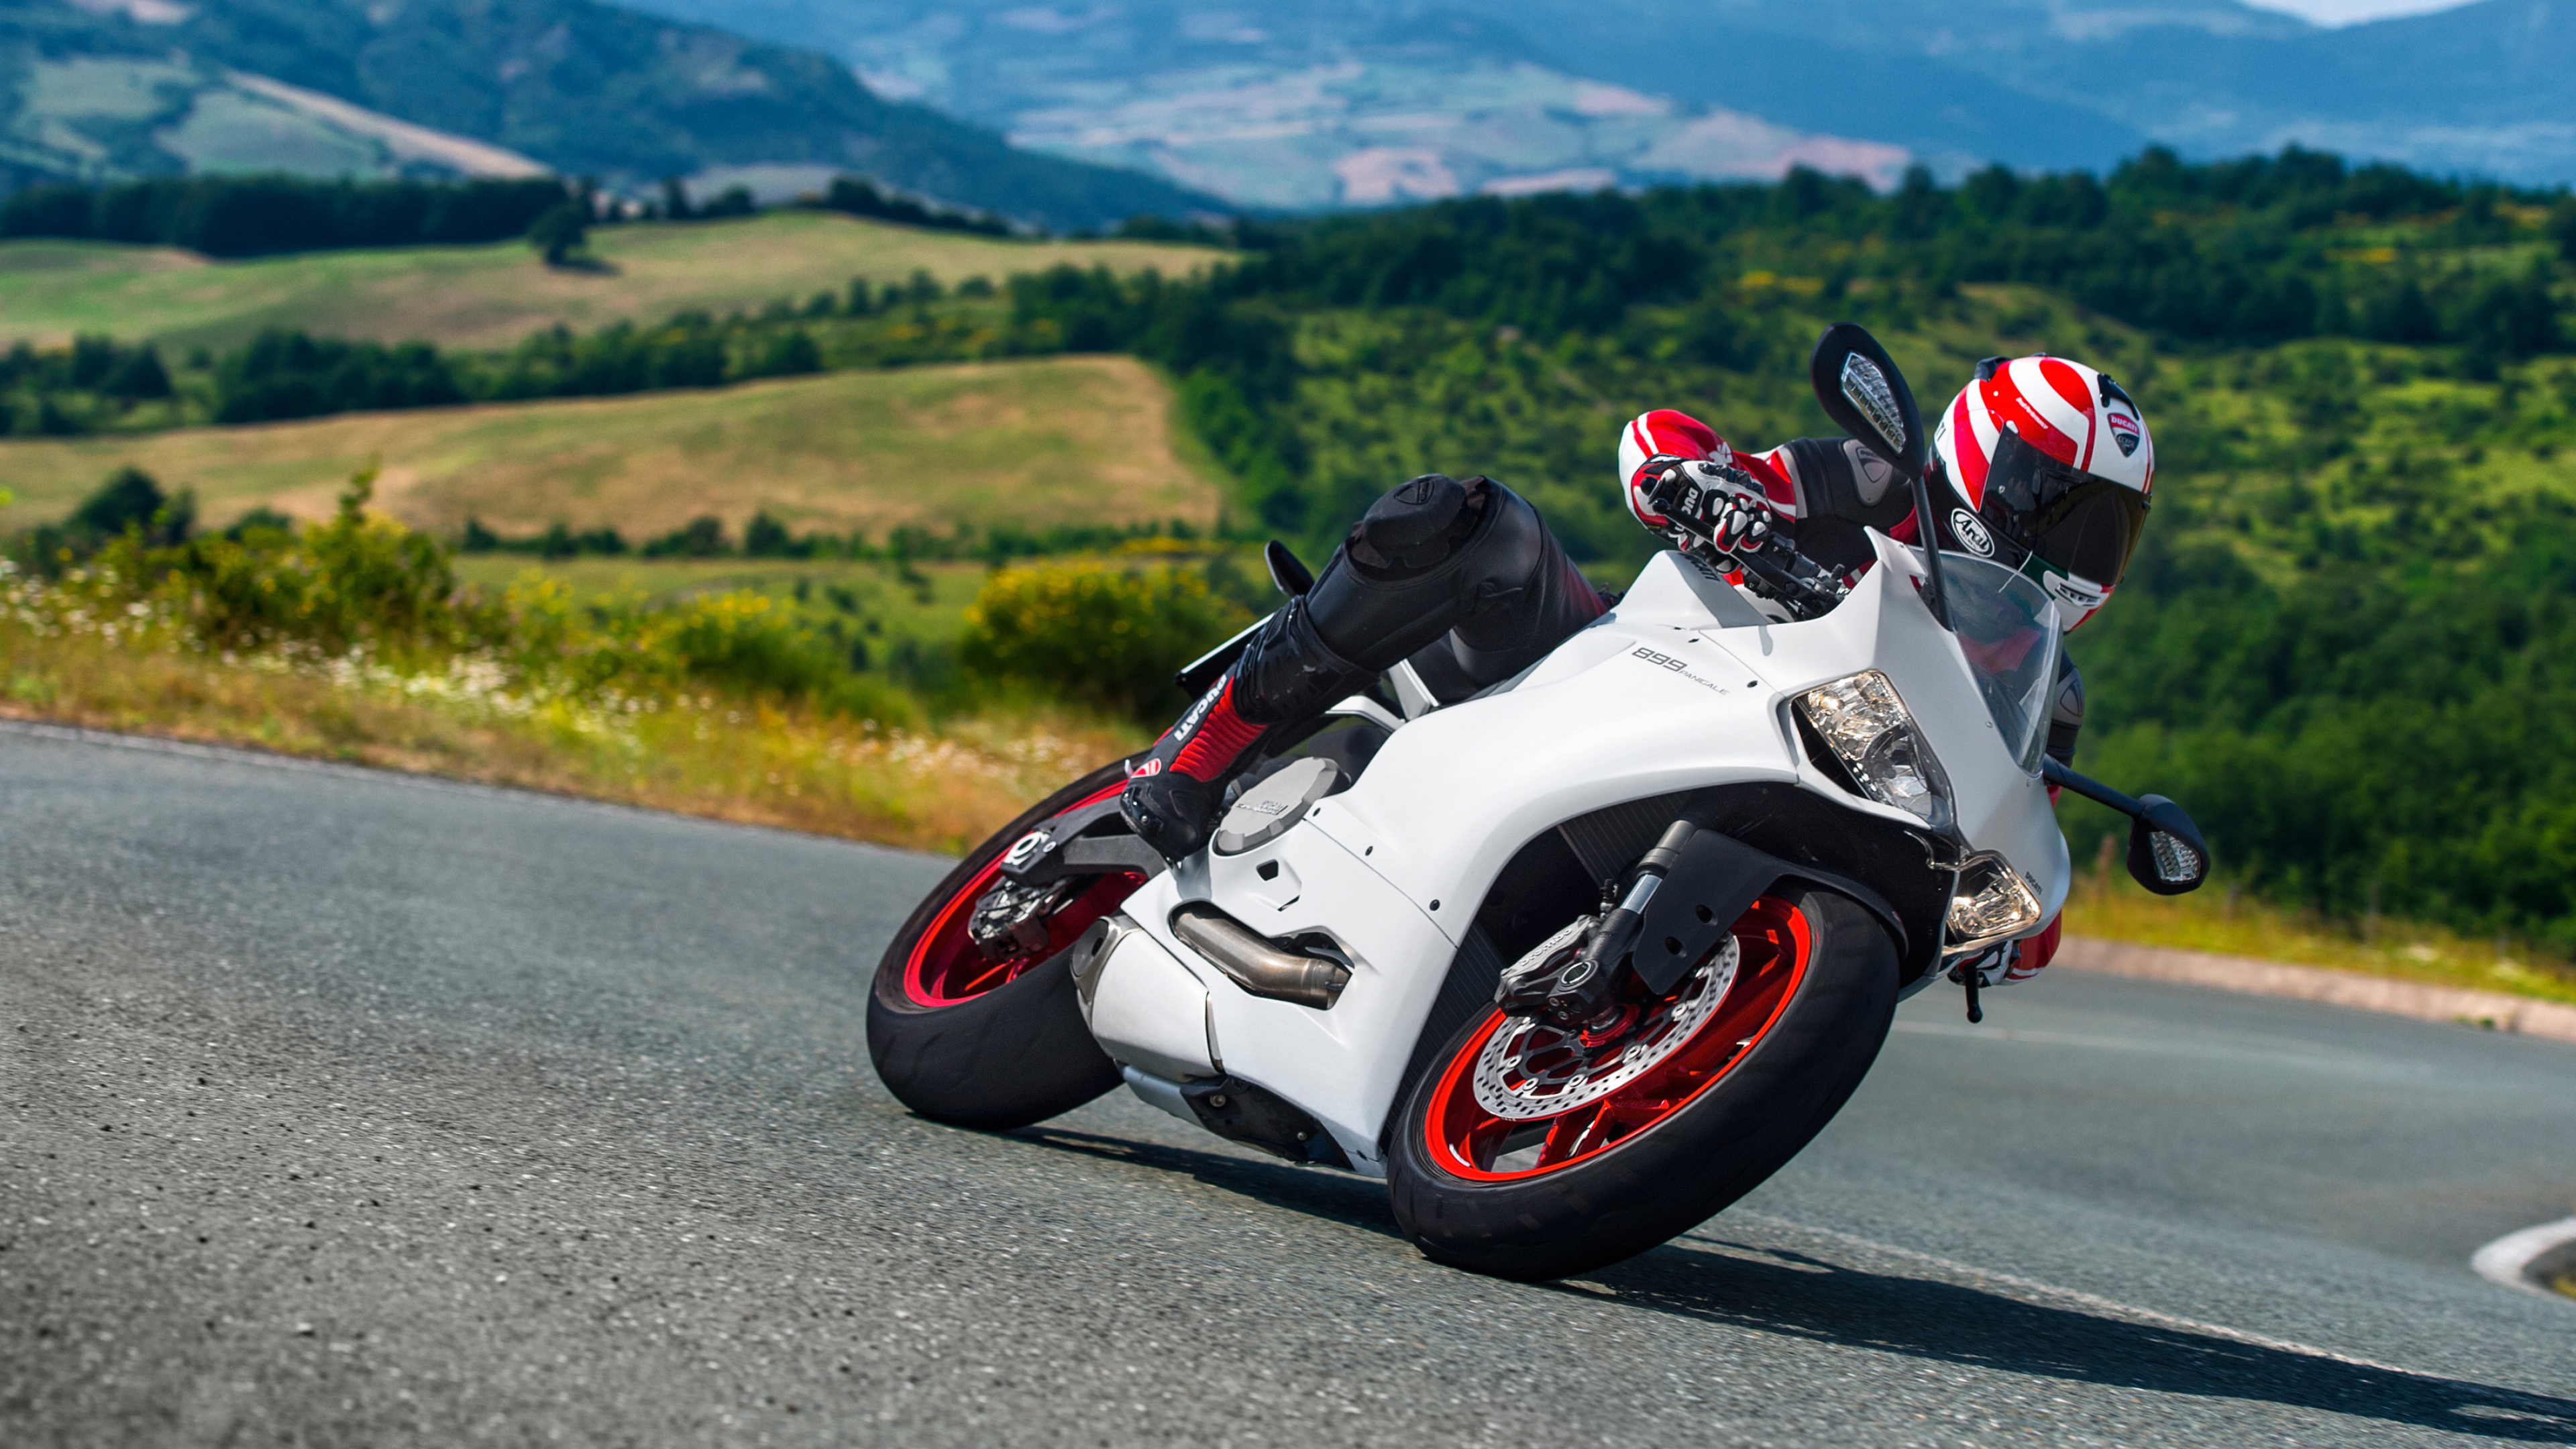 Superbike: The Ducati 899 Panigale, A model designed for speed and acceleration. 3840x2160 4K Wallpaper.